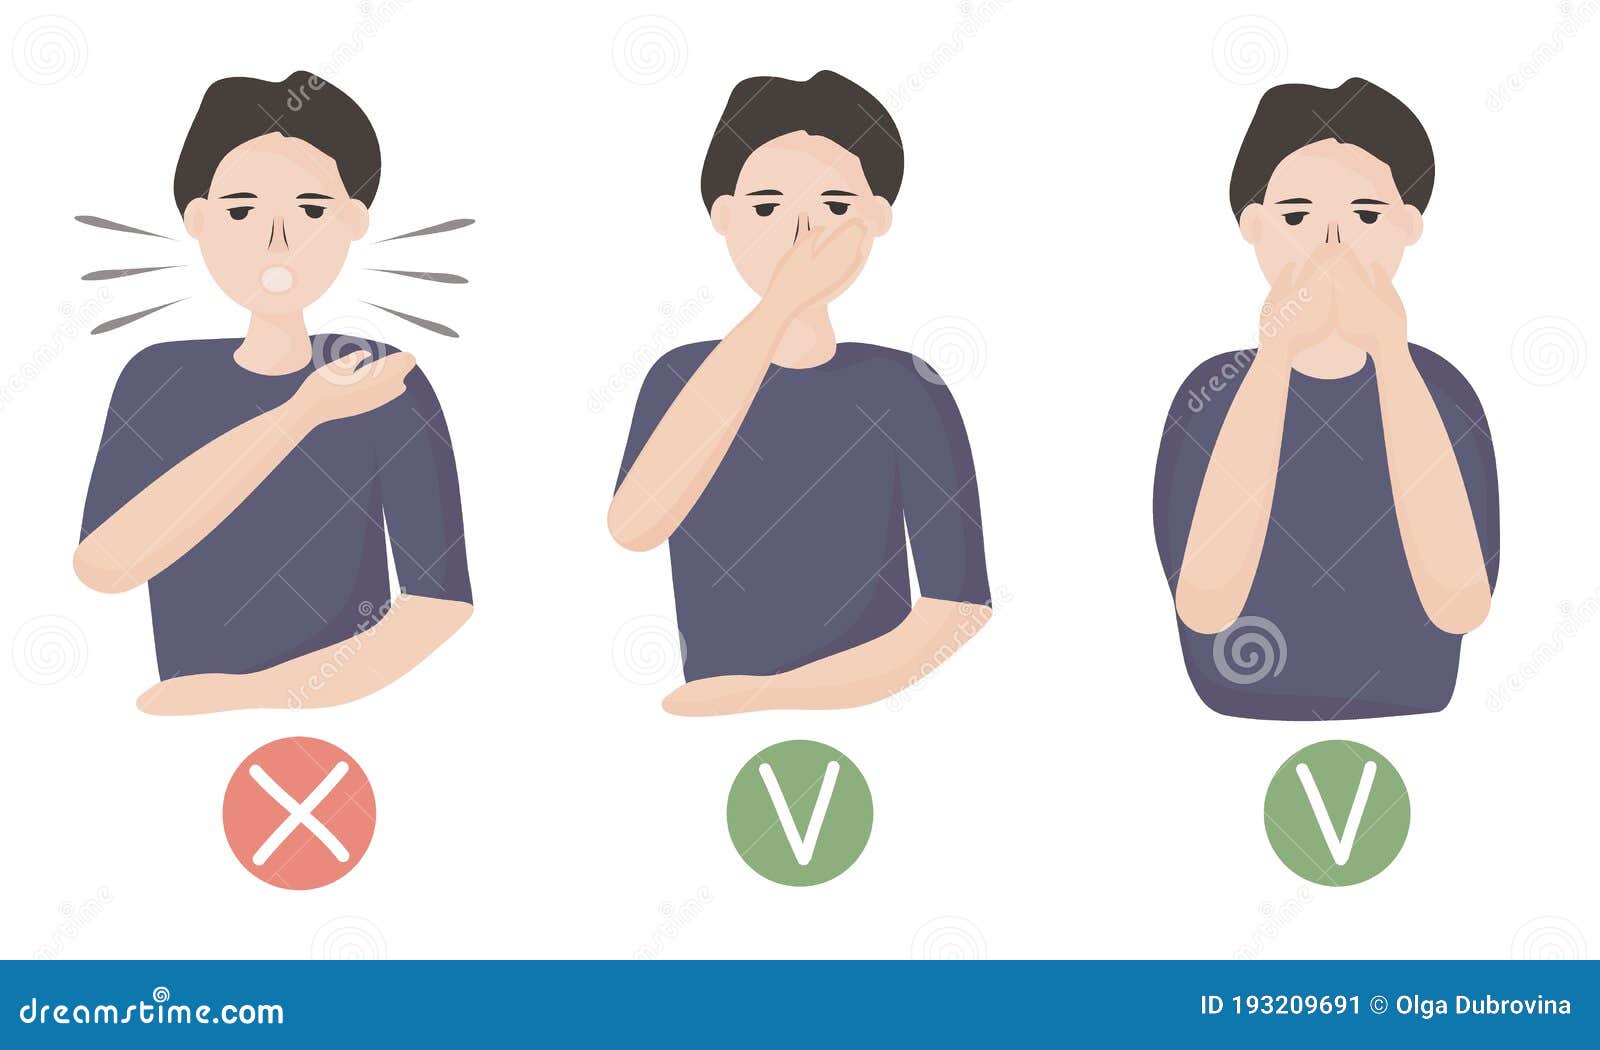 How To Sneeze or Cough Properly, To Prevent the Spread of Viruses. You ...